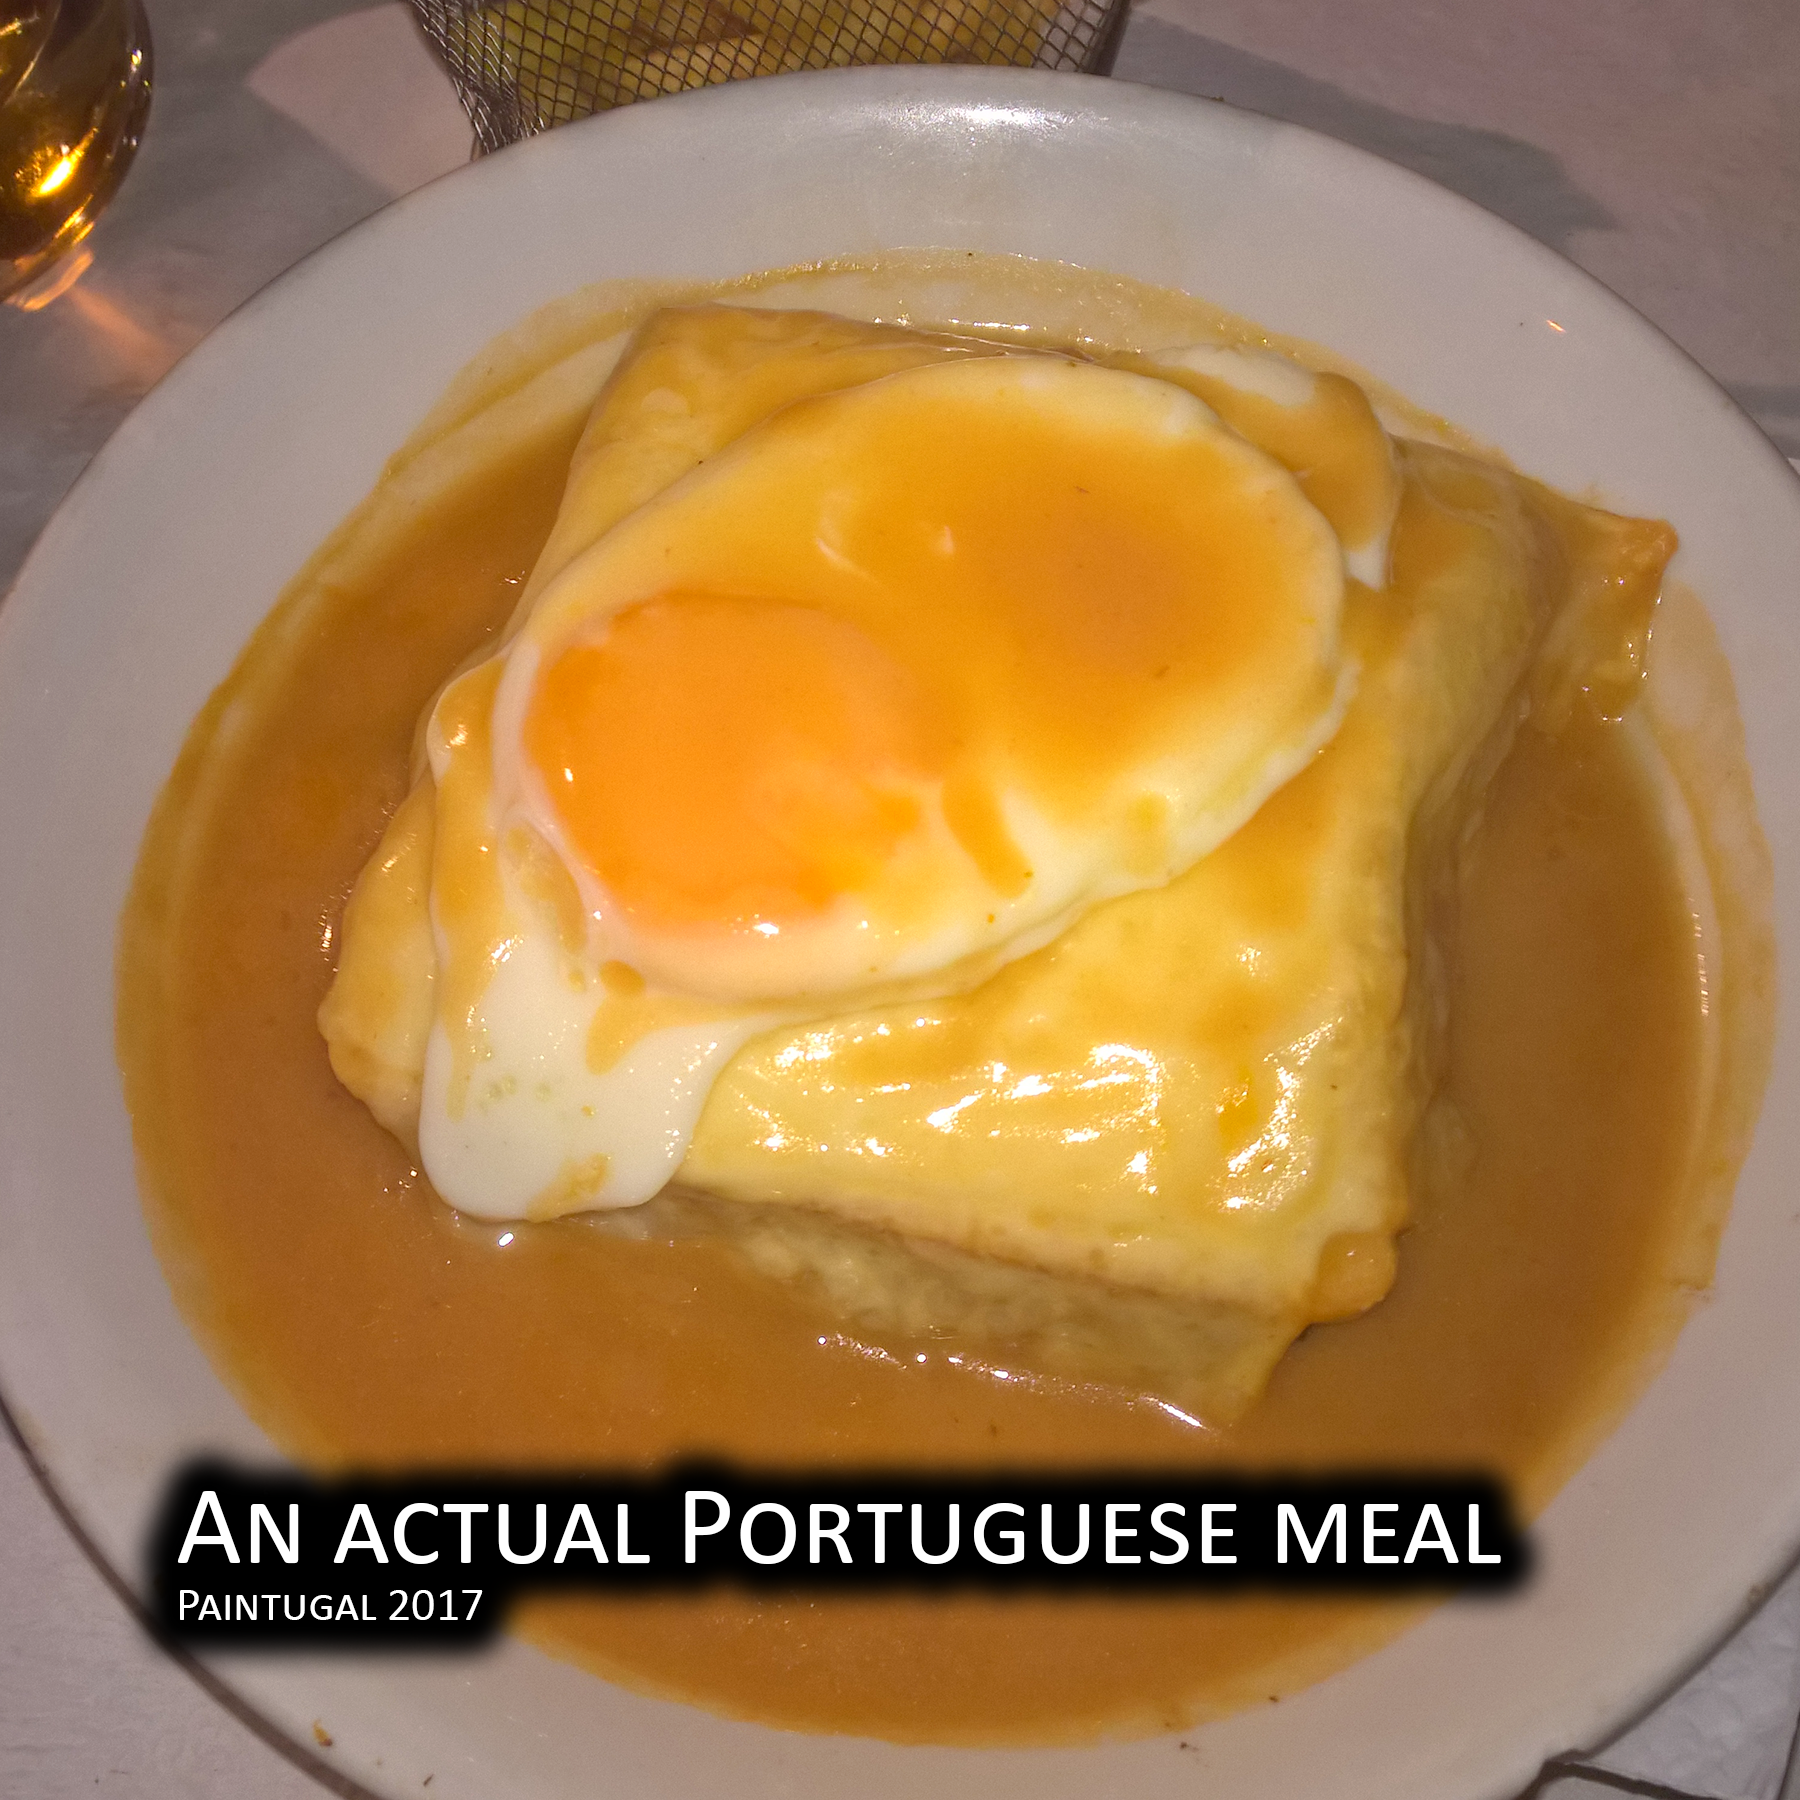 An actual Portuguese meal